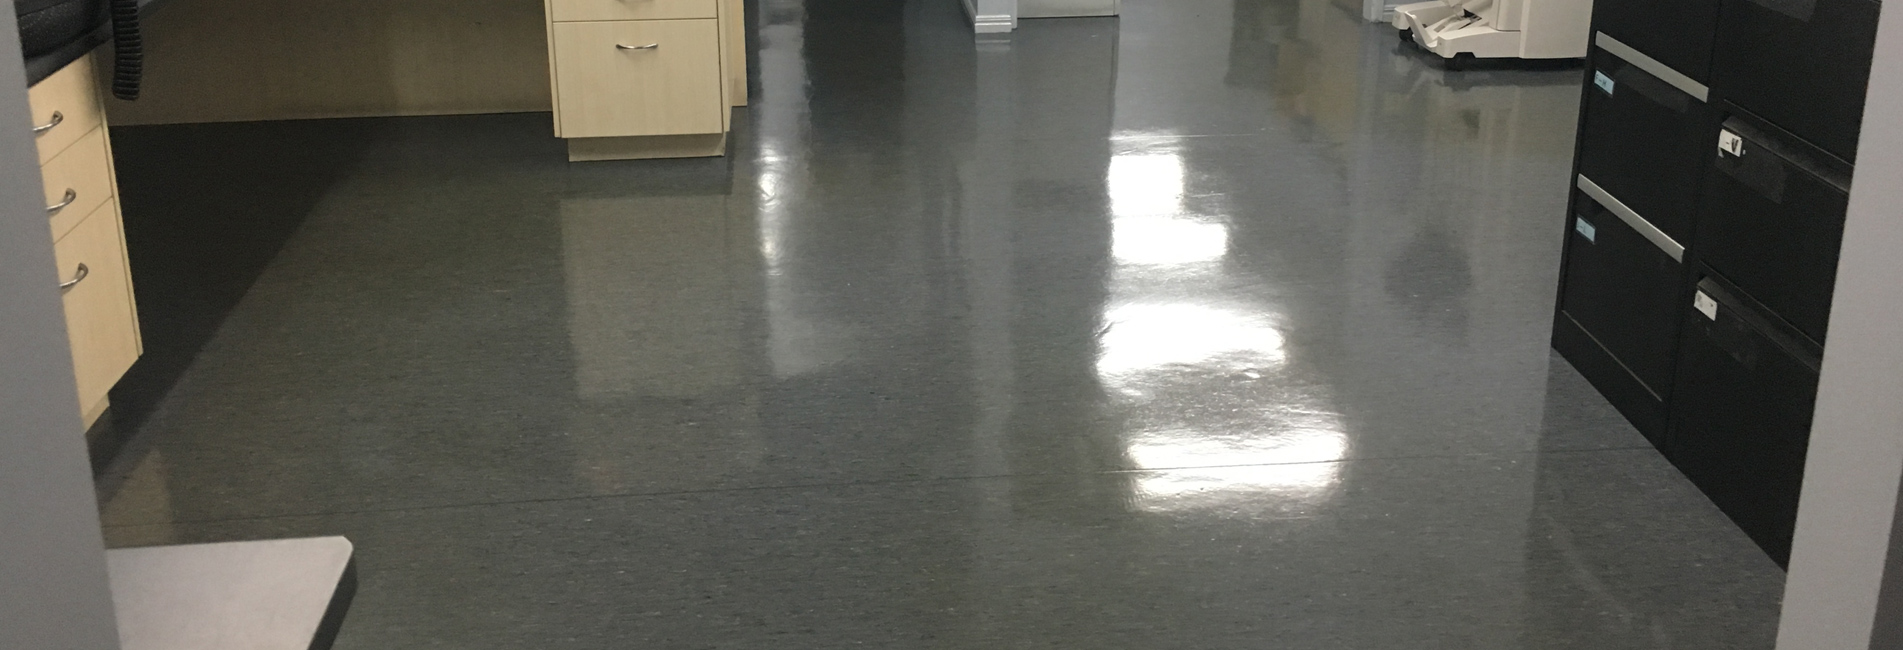 Vinyl Floor Sealing Redcliffe, Stripping & Sealing Margate, Commercial Cleaning QLD, Office Cleaning Scarborough, Medical Centre Cleaning Clontarf, Child Care Cleaning Kippa-Ring